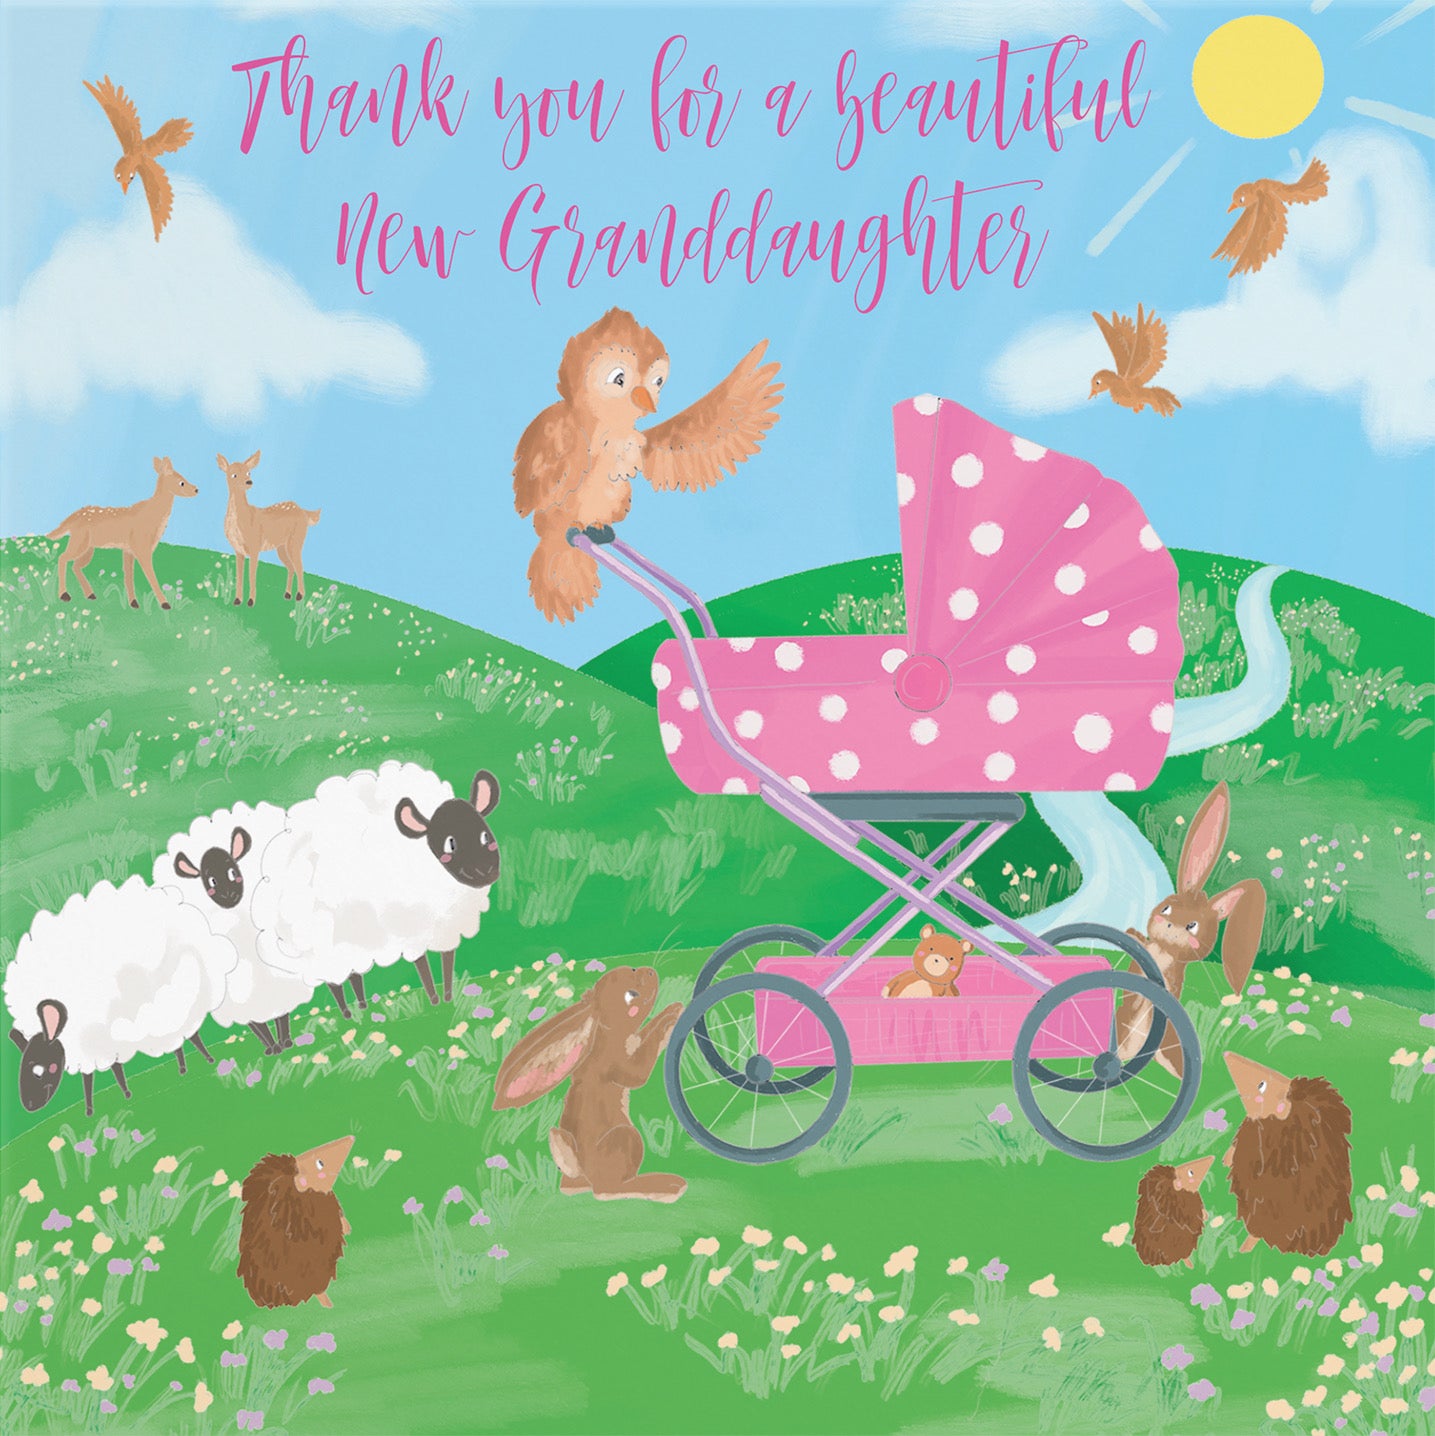 New Baby Granddaughter Thank You Card Countryside - Default Title (B09VMQJ9P1)